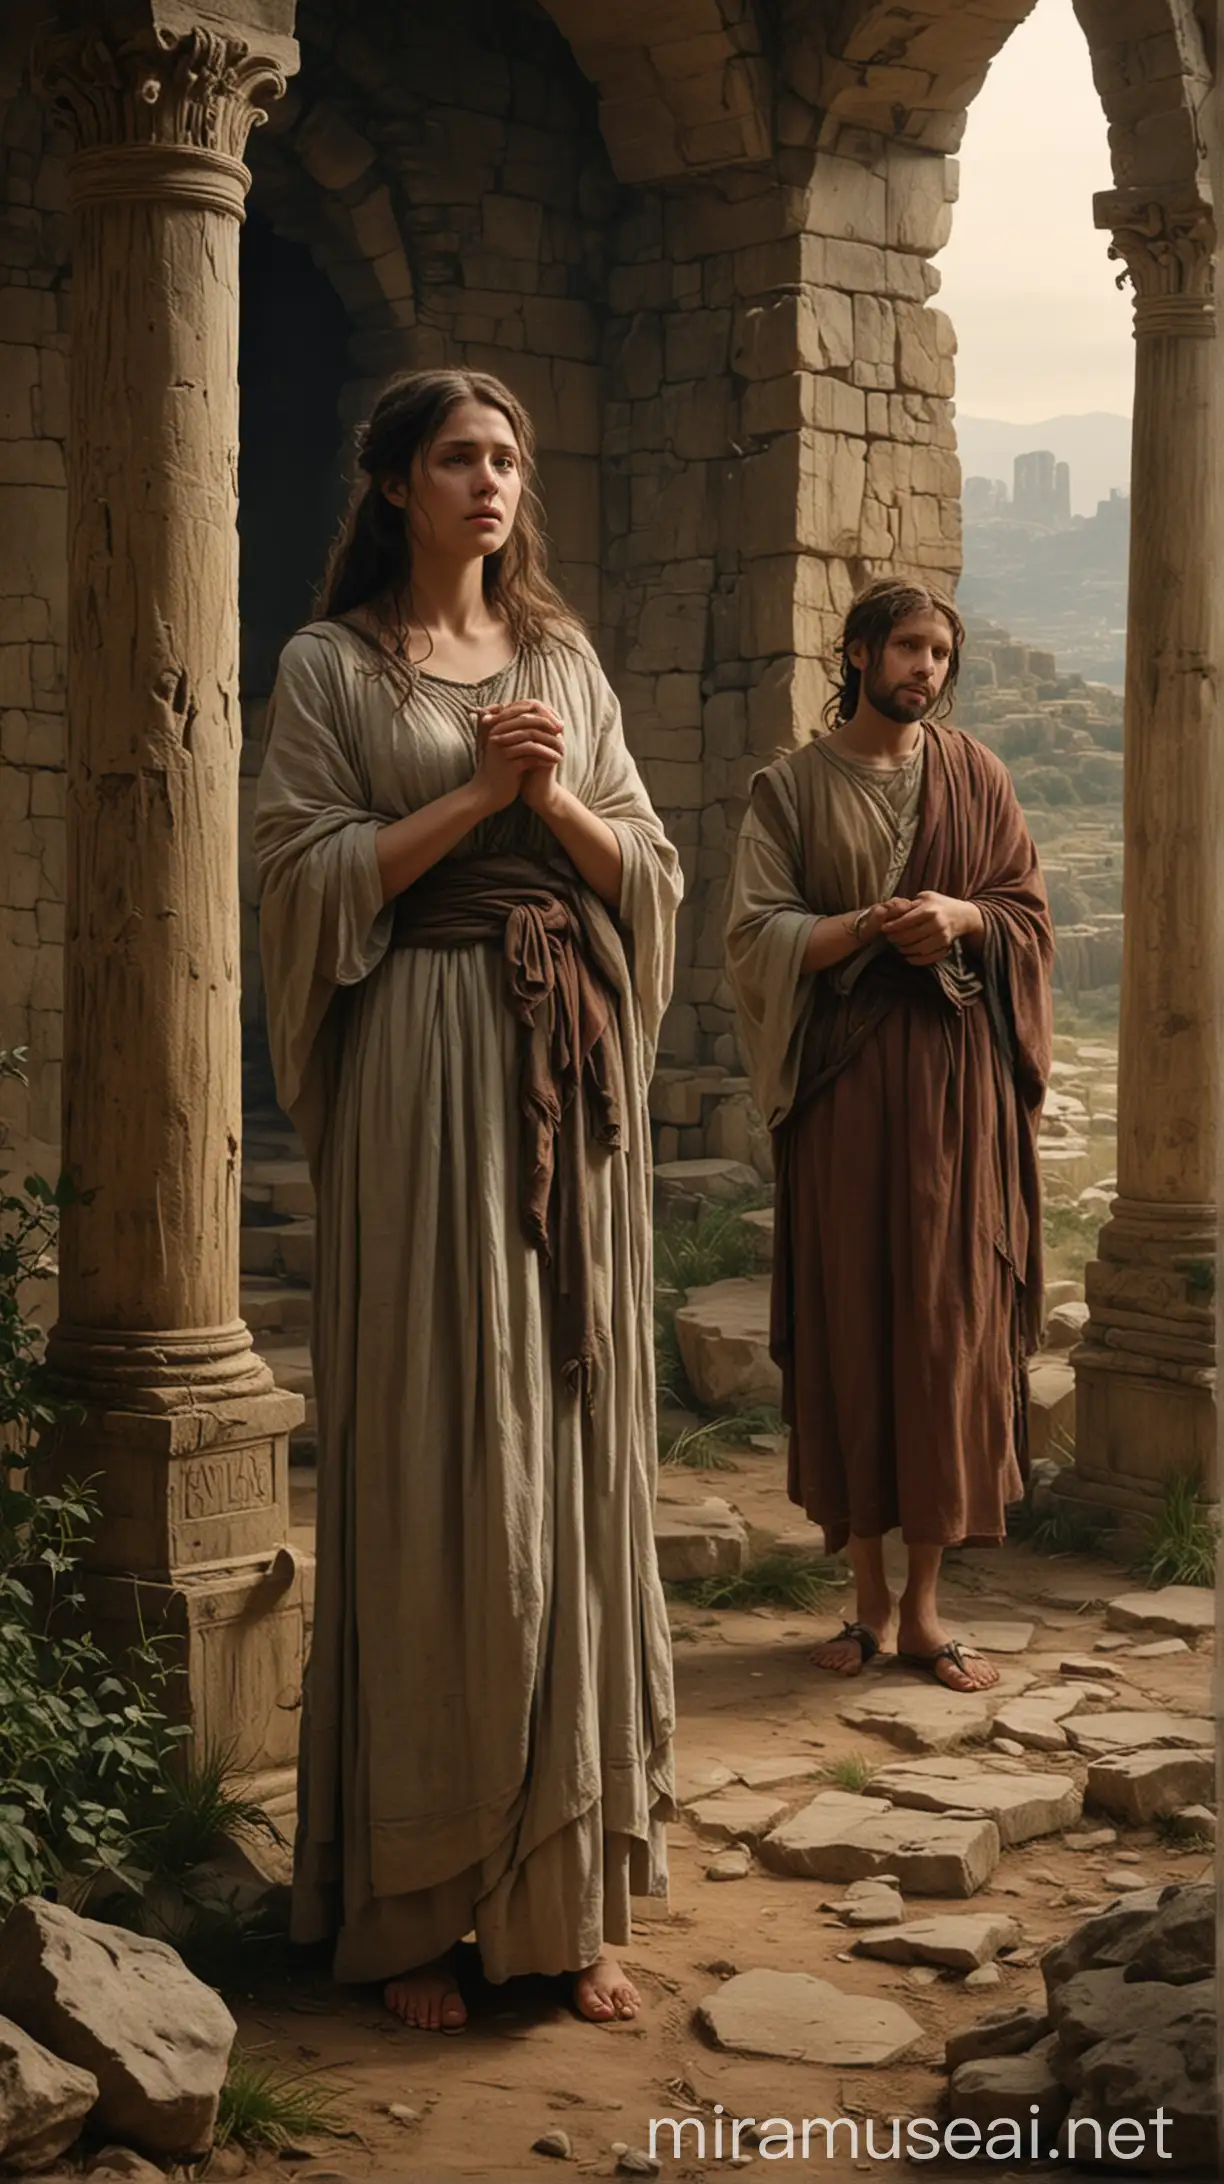 Illustrate a somber and dramatic moment in a biblical setting where Lot and his younger daughter are together, hinting at their controversial union. The background should be a primitive, ancient environment."In ancient world 